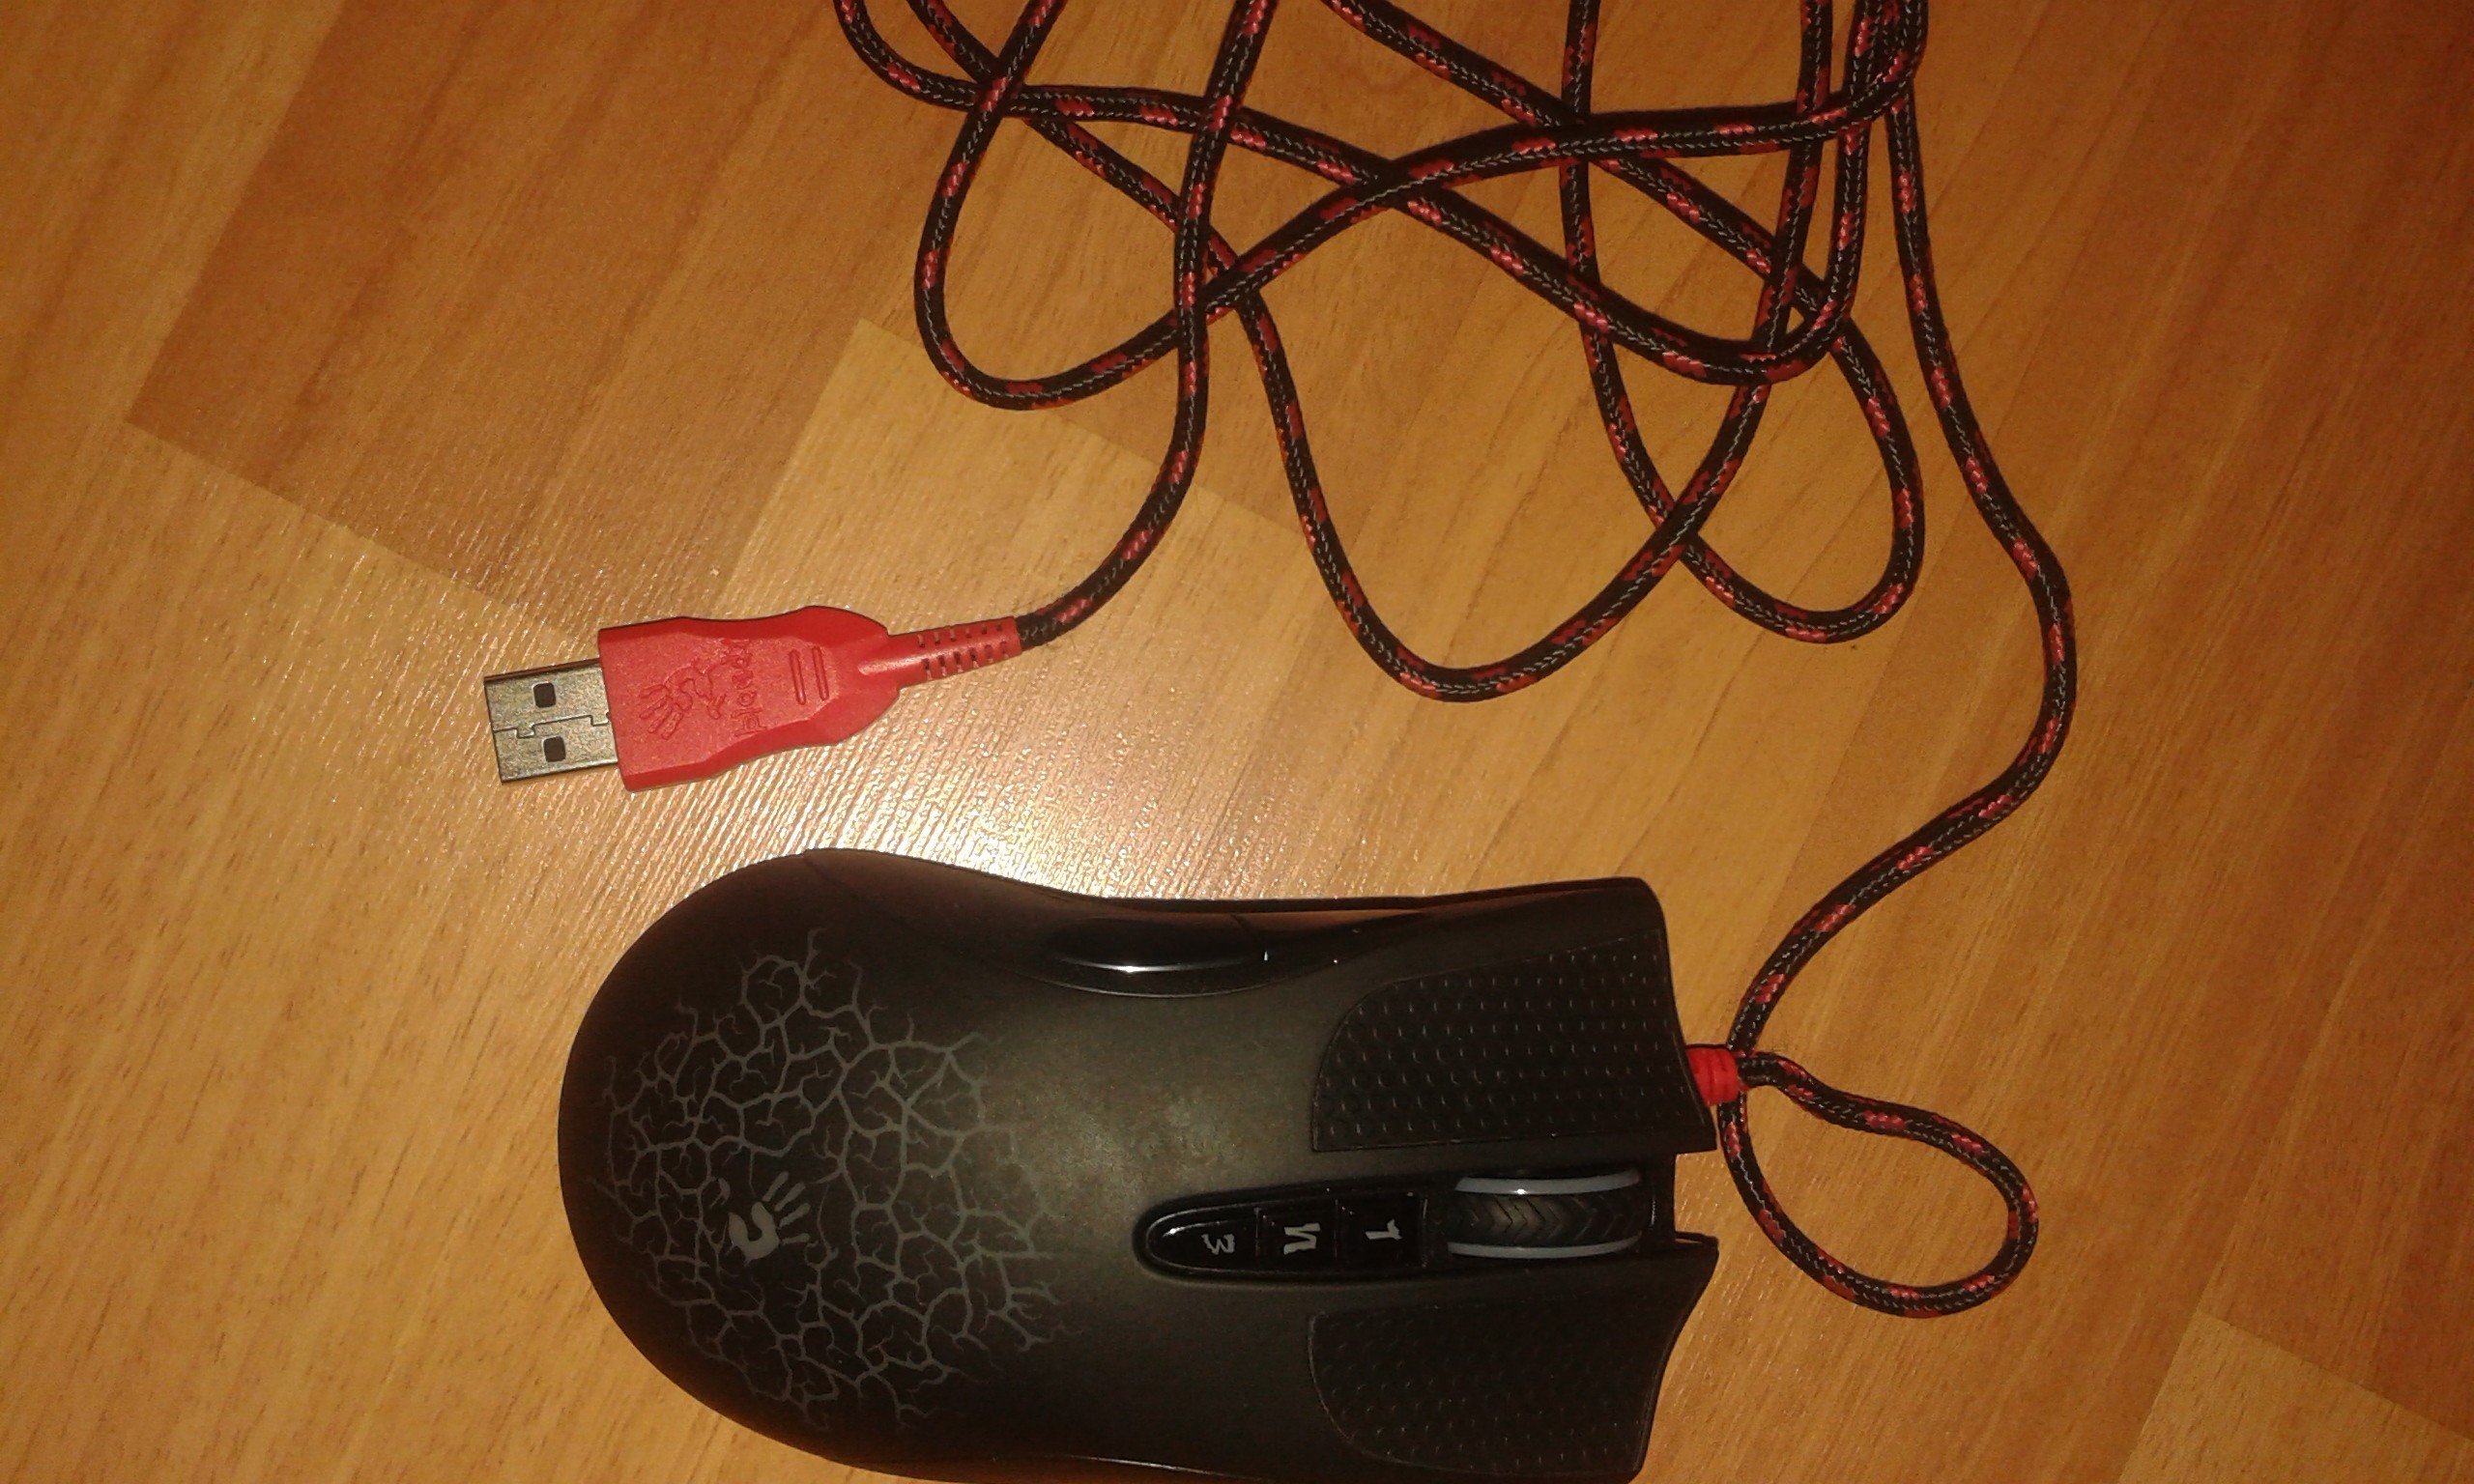 Disconnected eac blacklisted device bloody mouse a4tech rust что делать фото 60